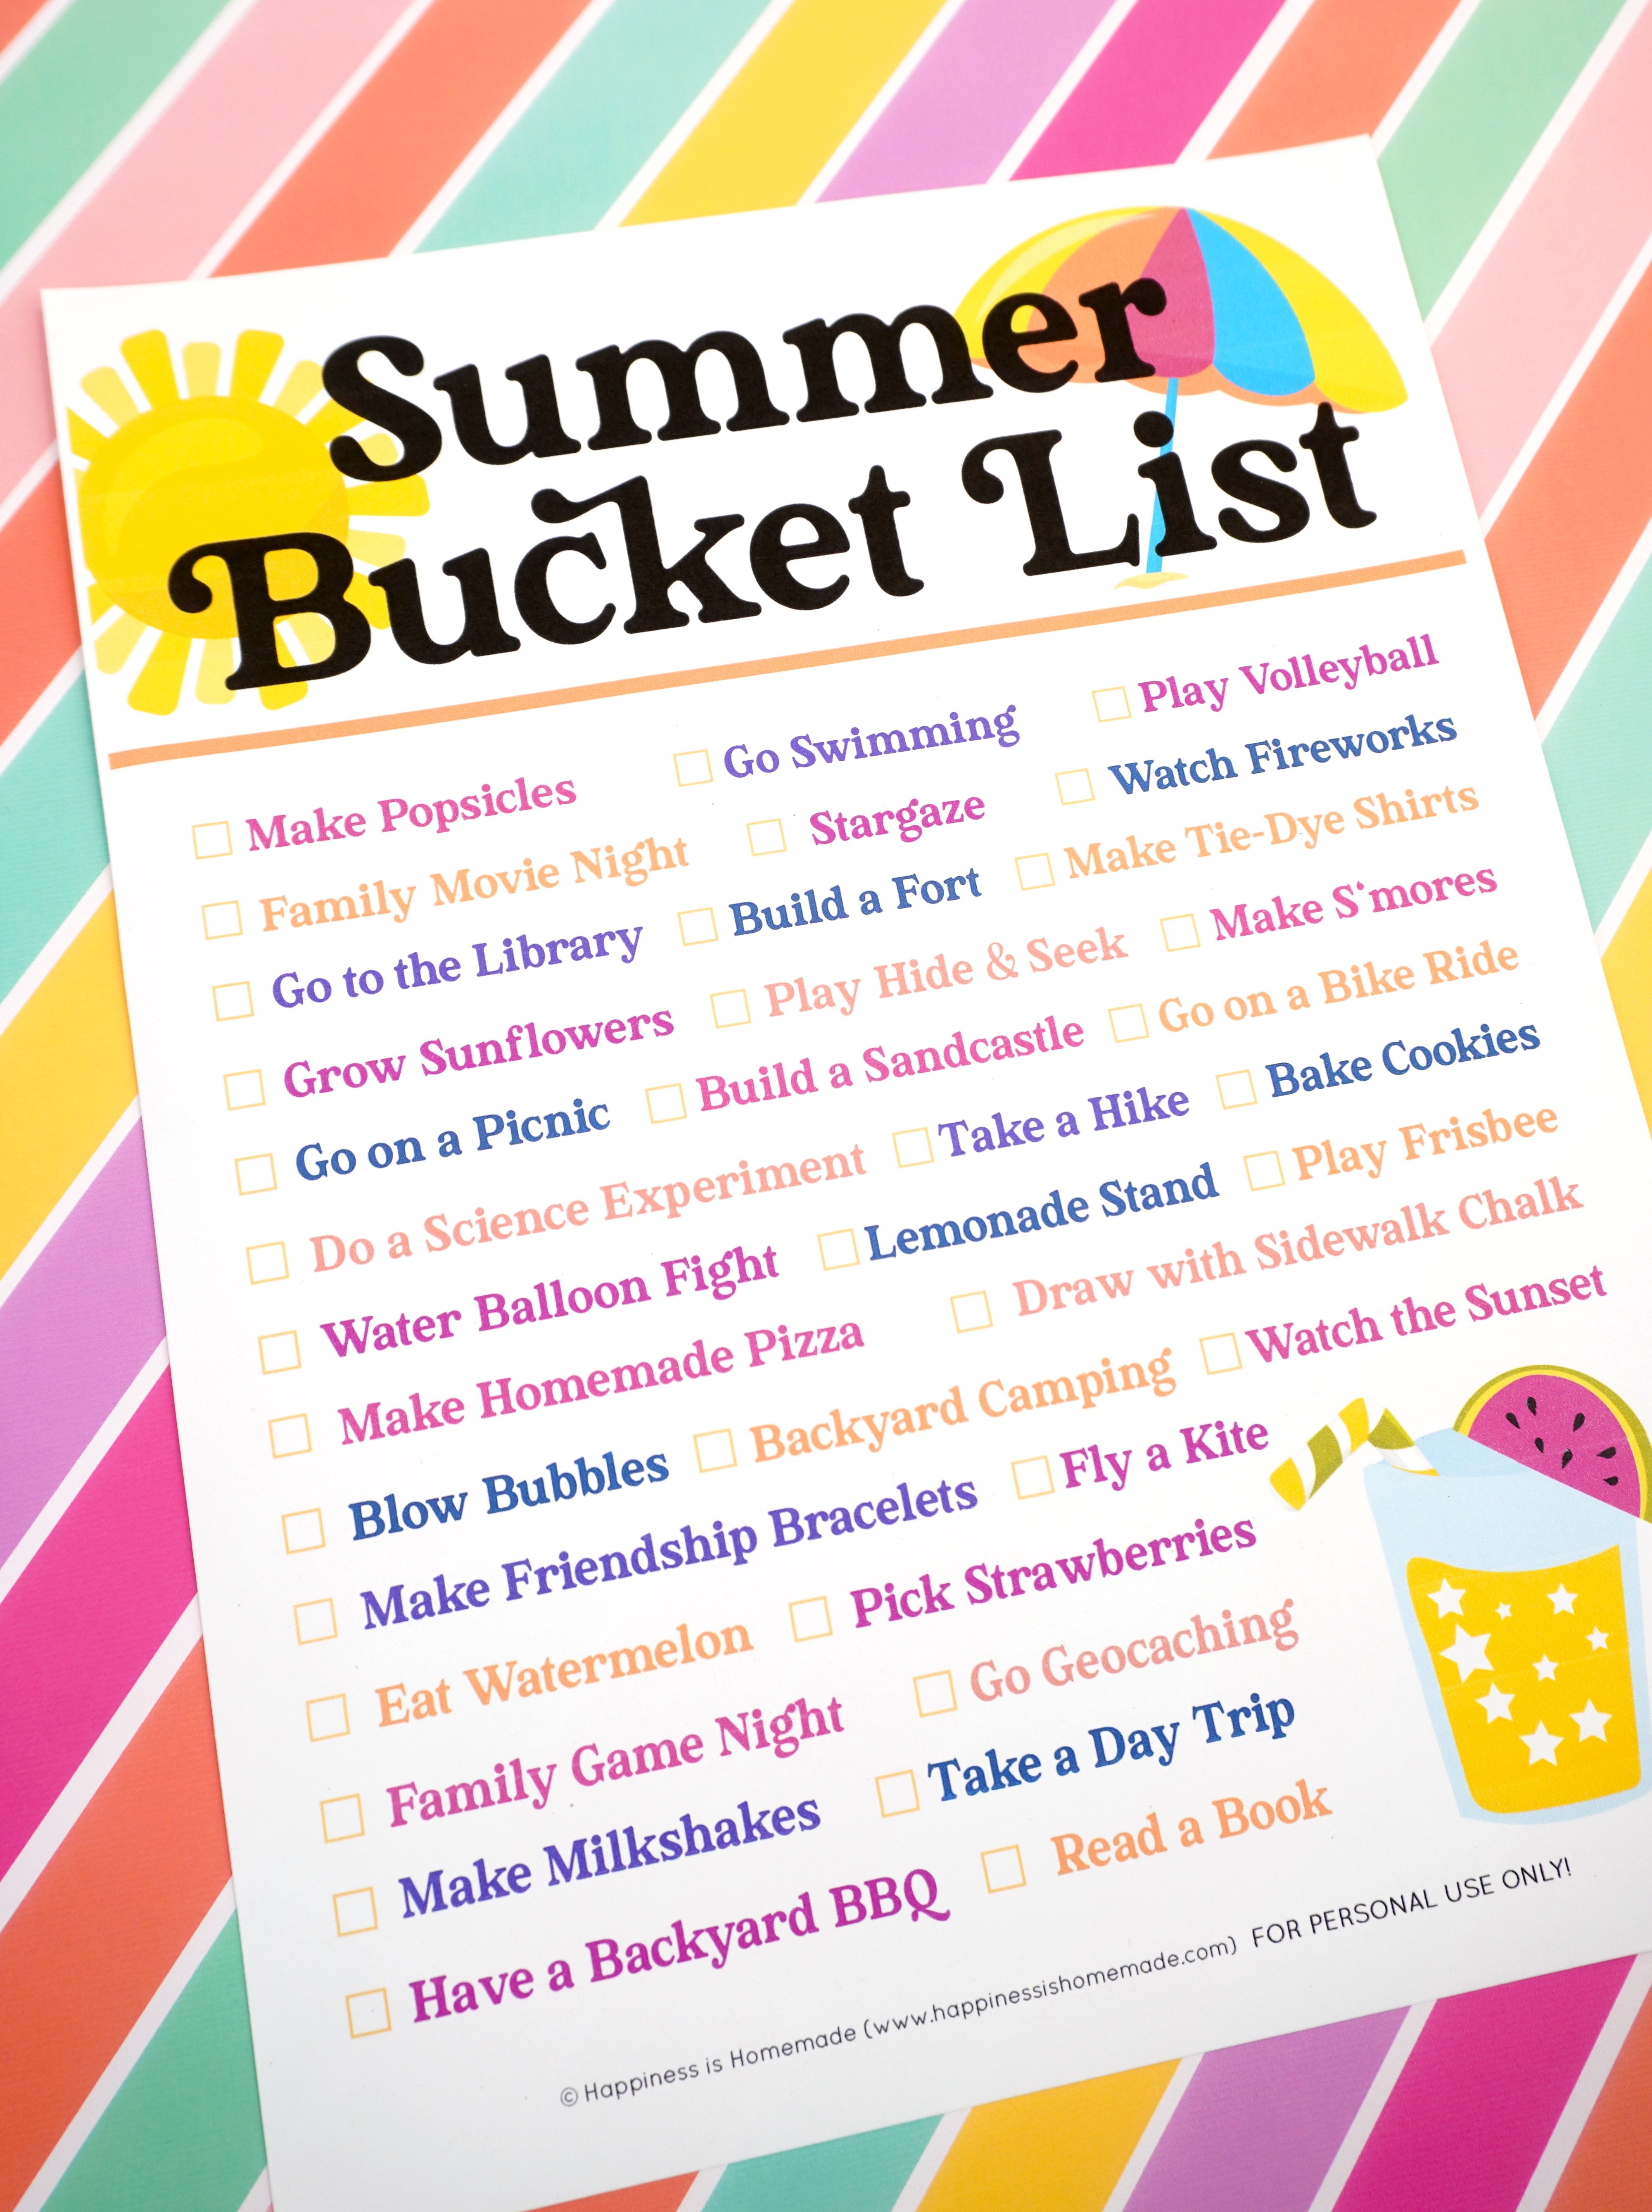 Summer Bucket List printable on a colorful striped background